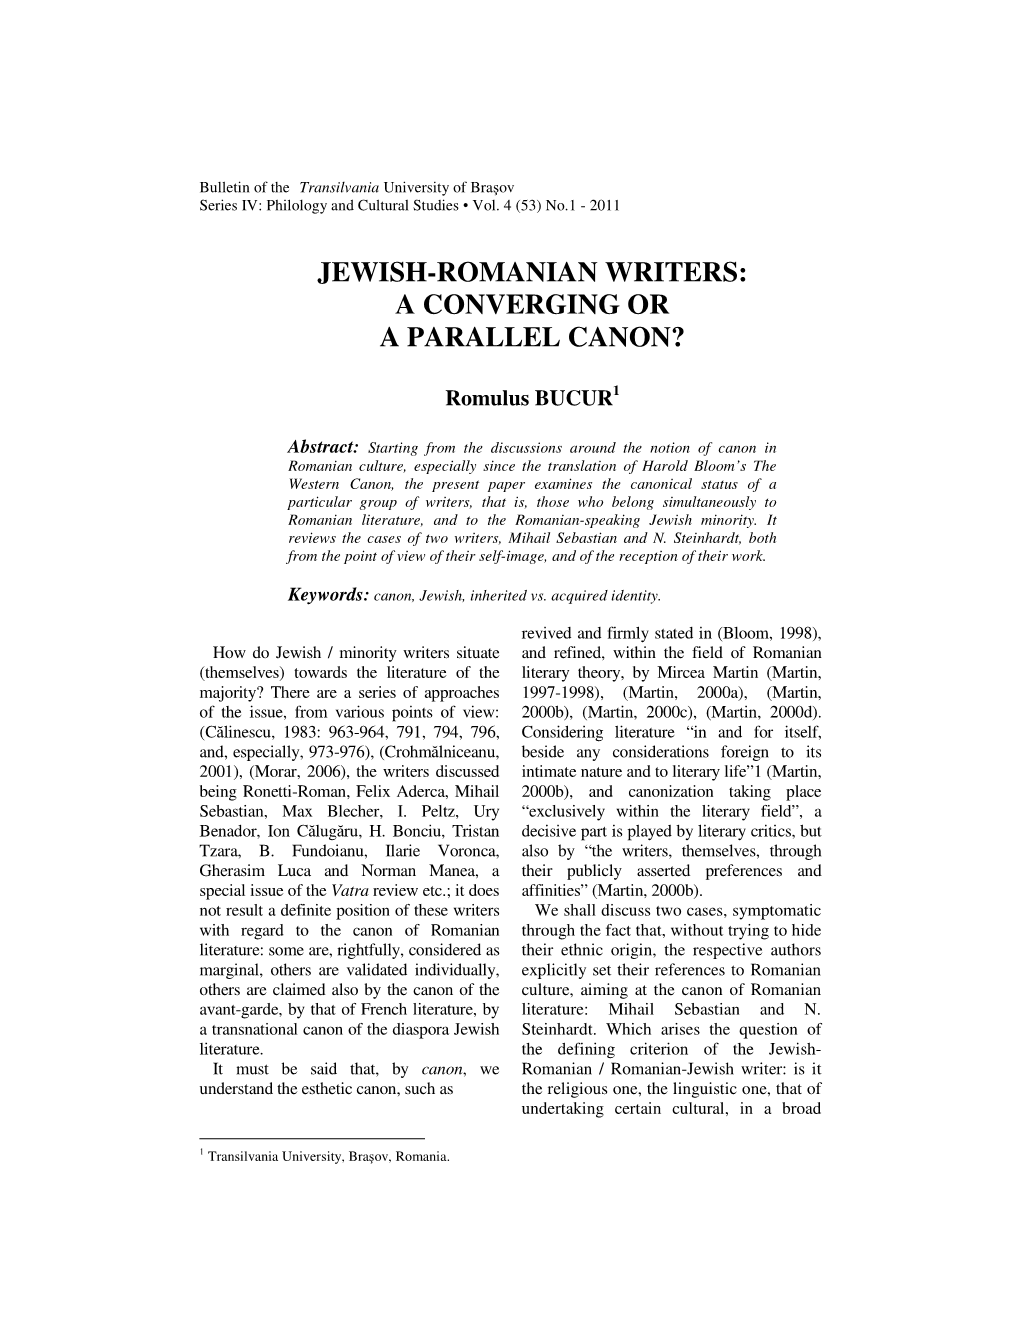 Bucur, R. Jewish-Romanian Writers: a Converging Or a Parallel Canon